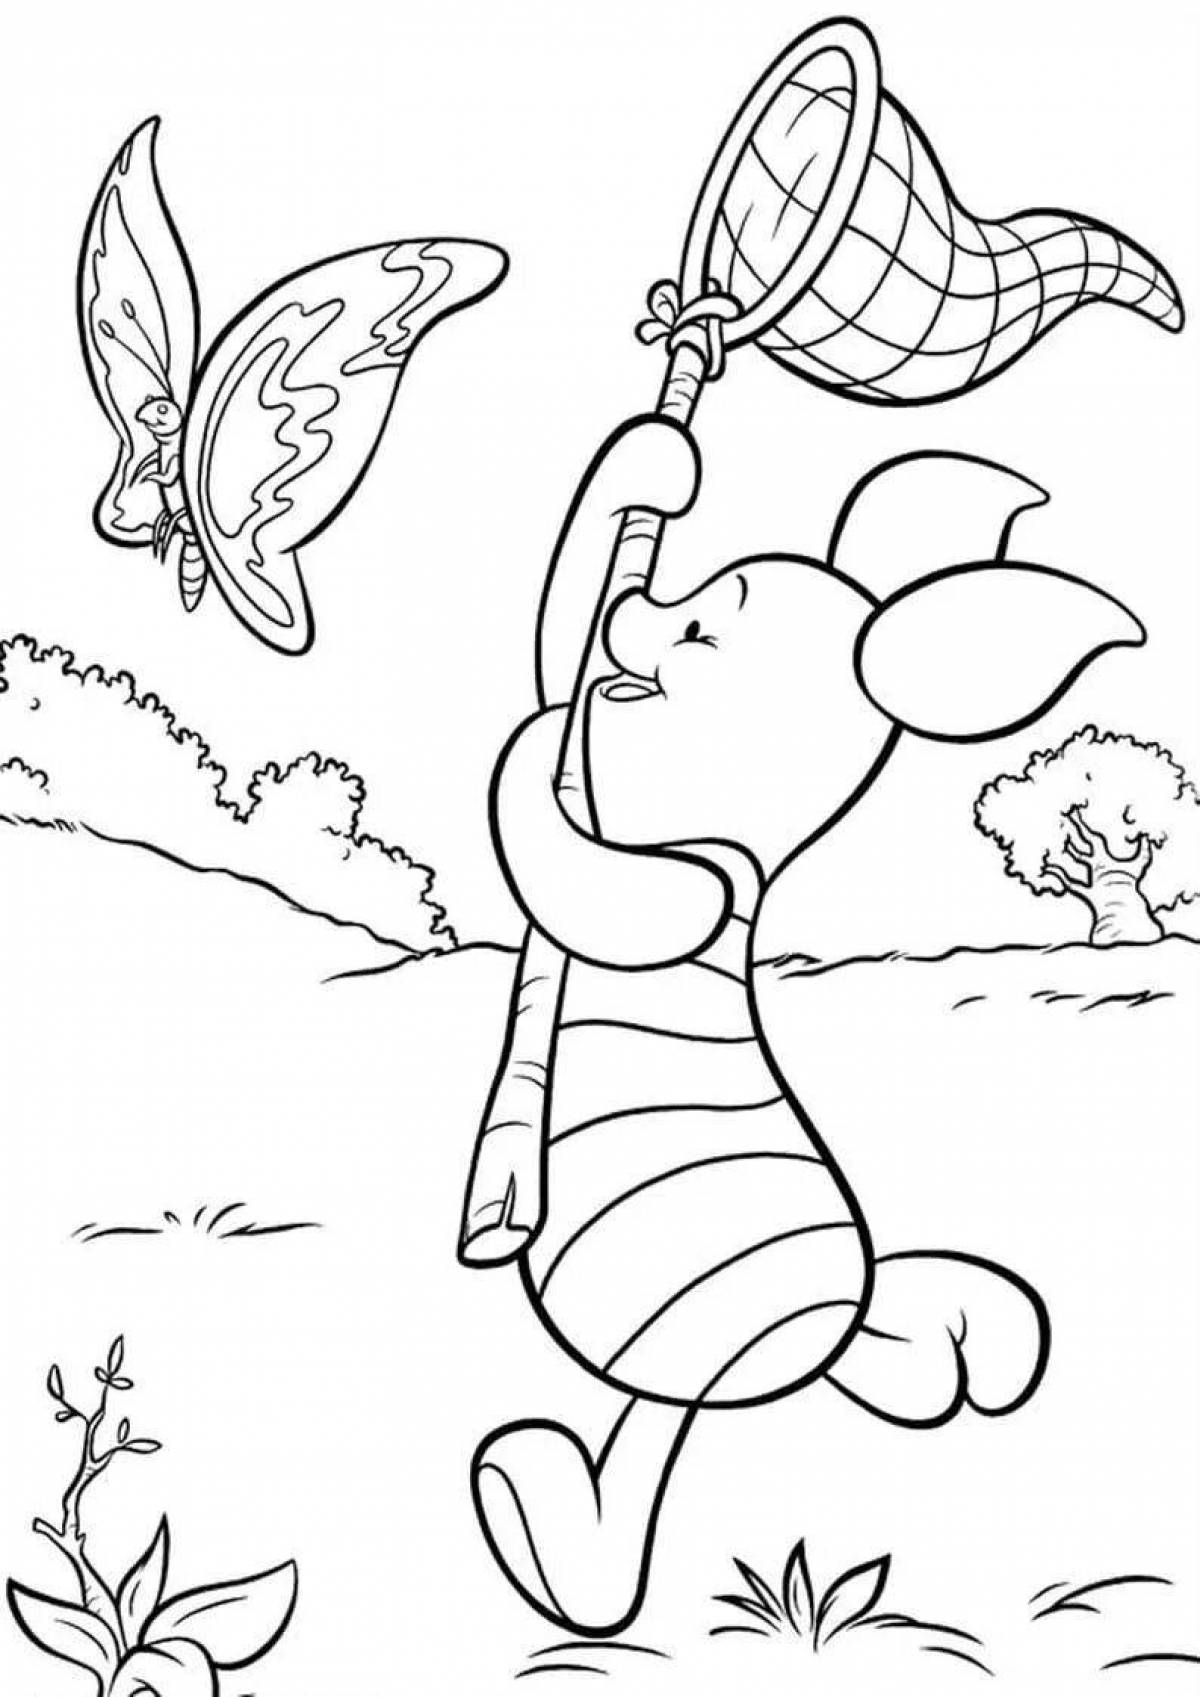 Winnie the pooh and friends bright coloring